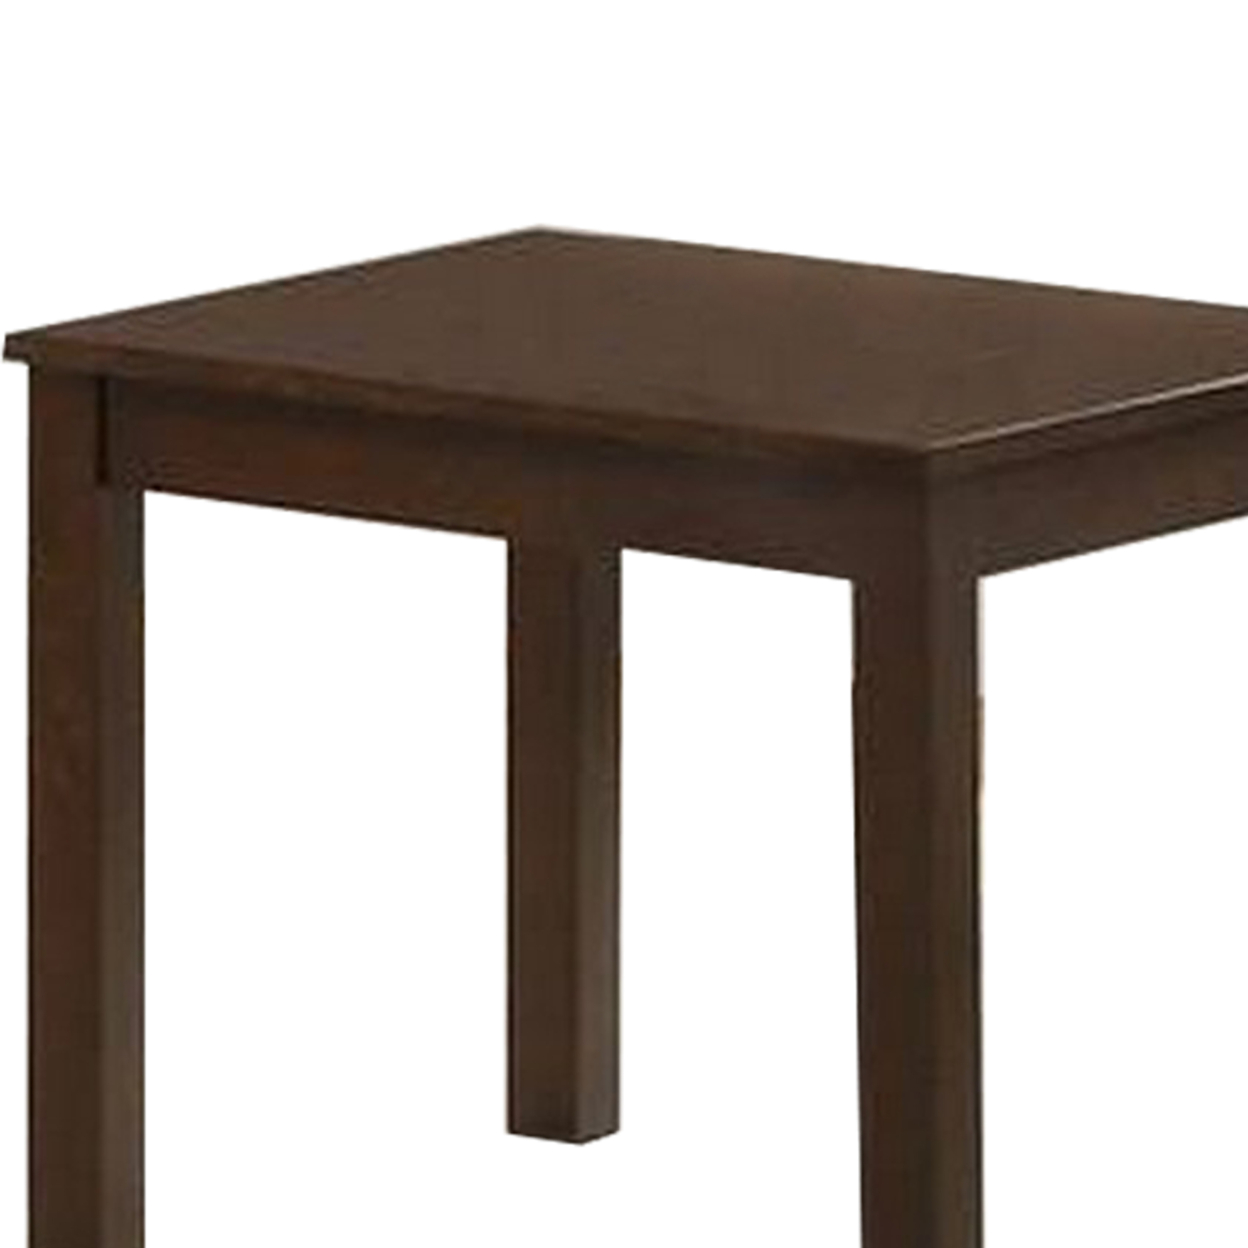 3 Piece Transitional Coffee Table And End Table With Block Legs, Brown- Saltoro Sherpi